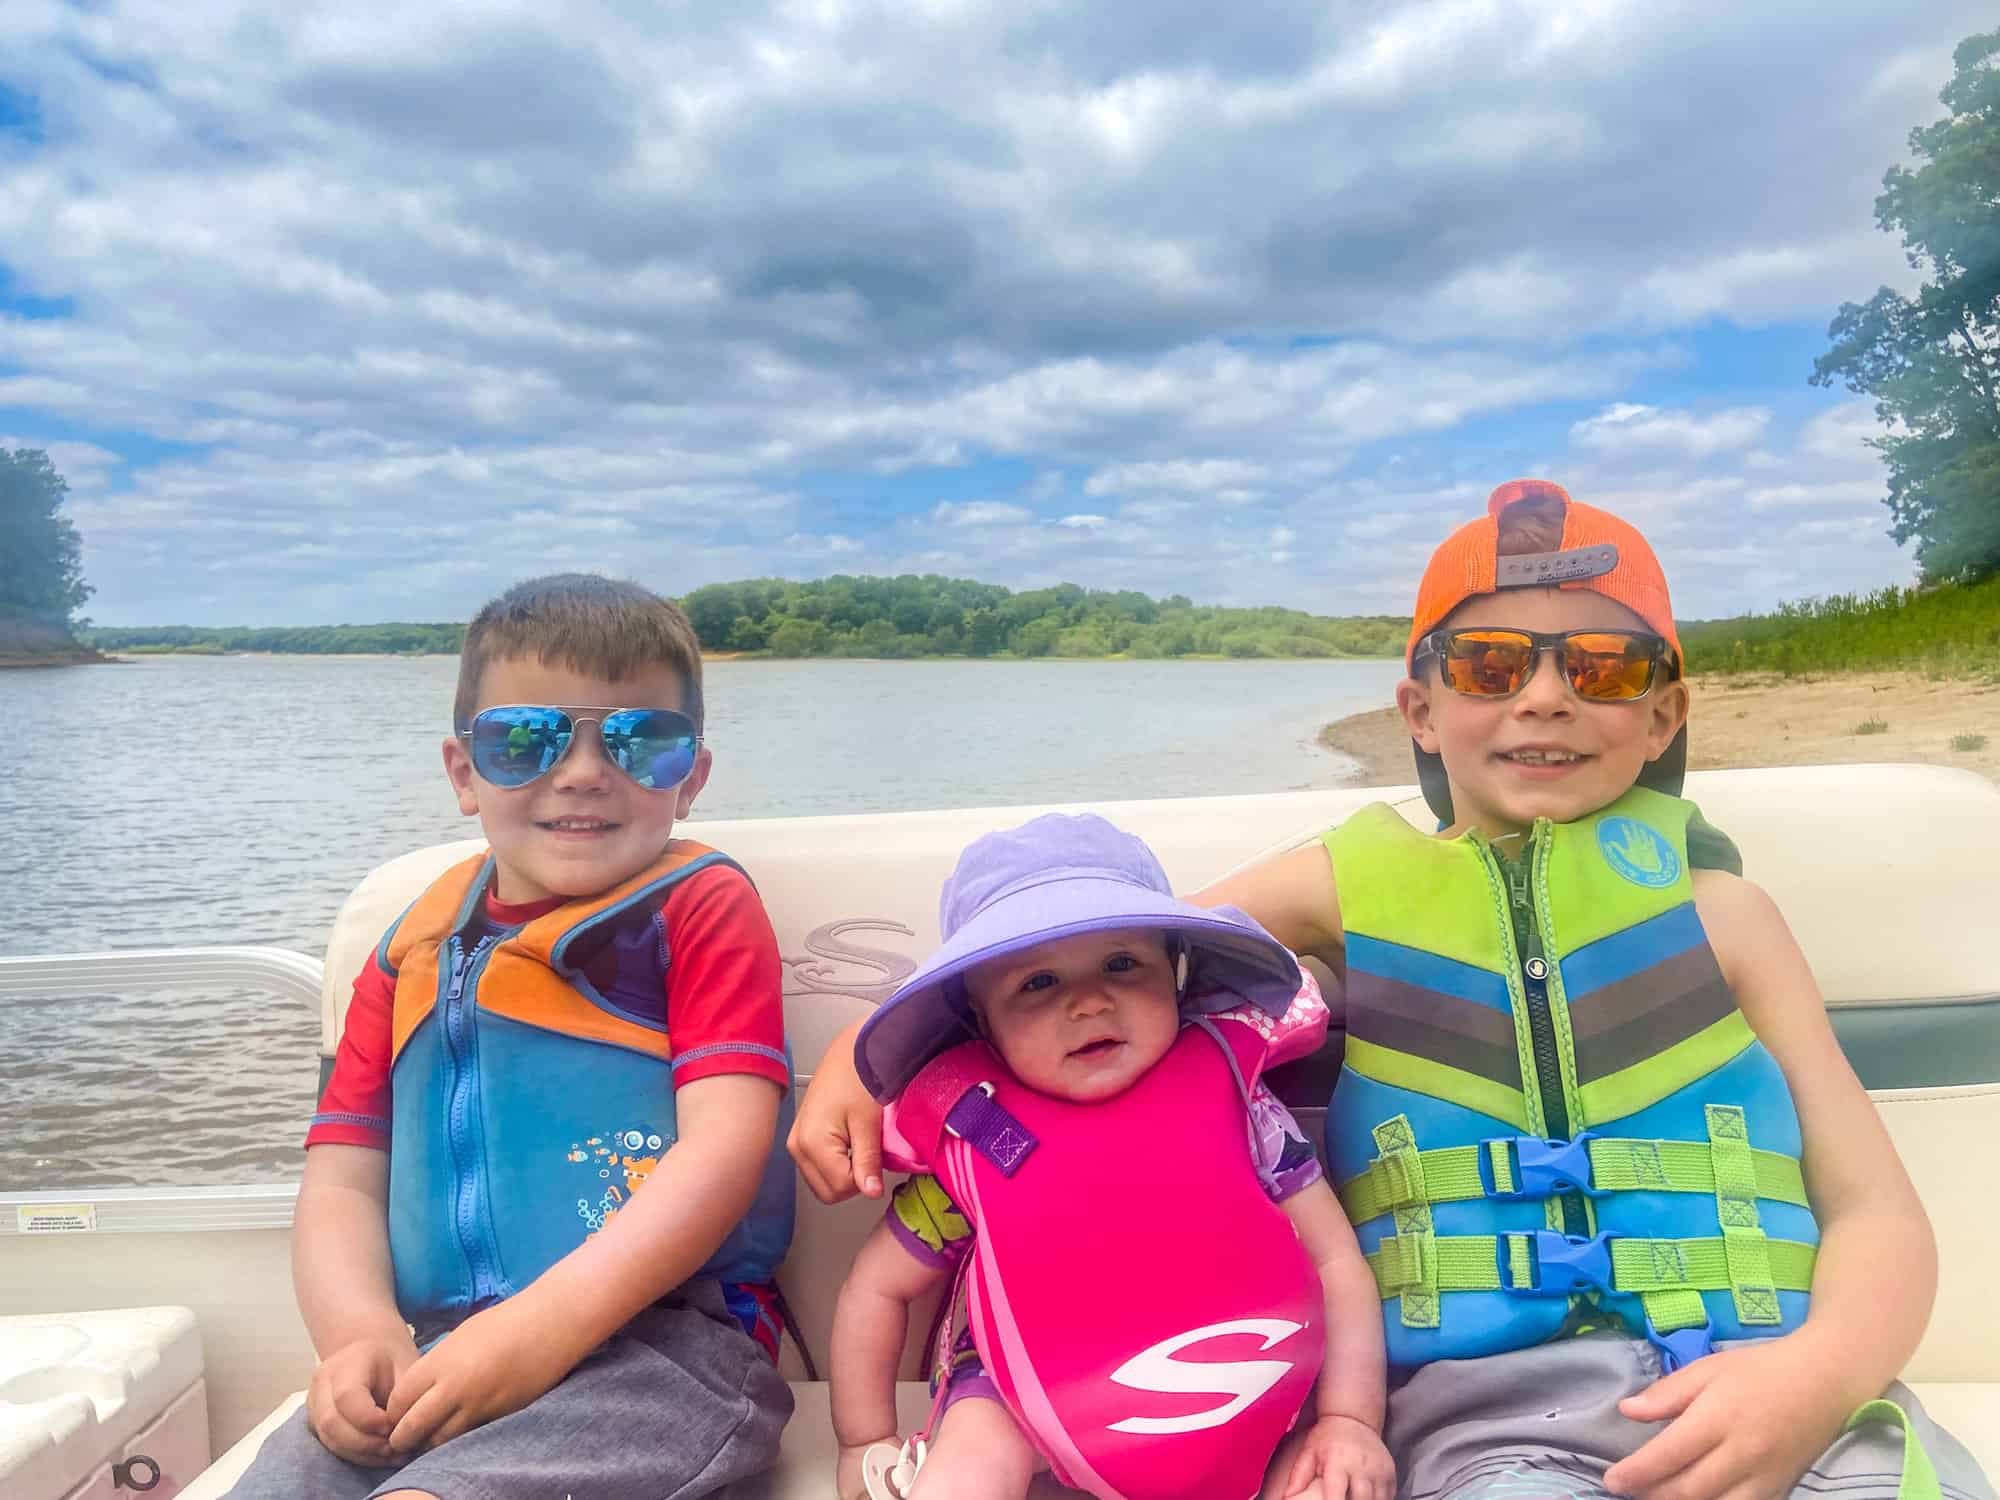 How To Choose The Safest Life Jacket For Your Kids This Summer - NDPA